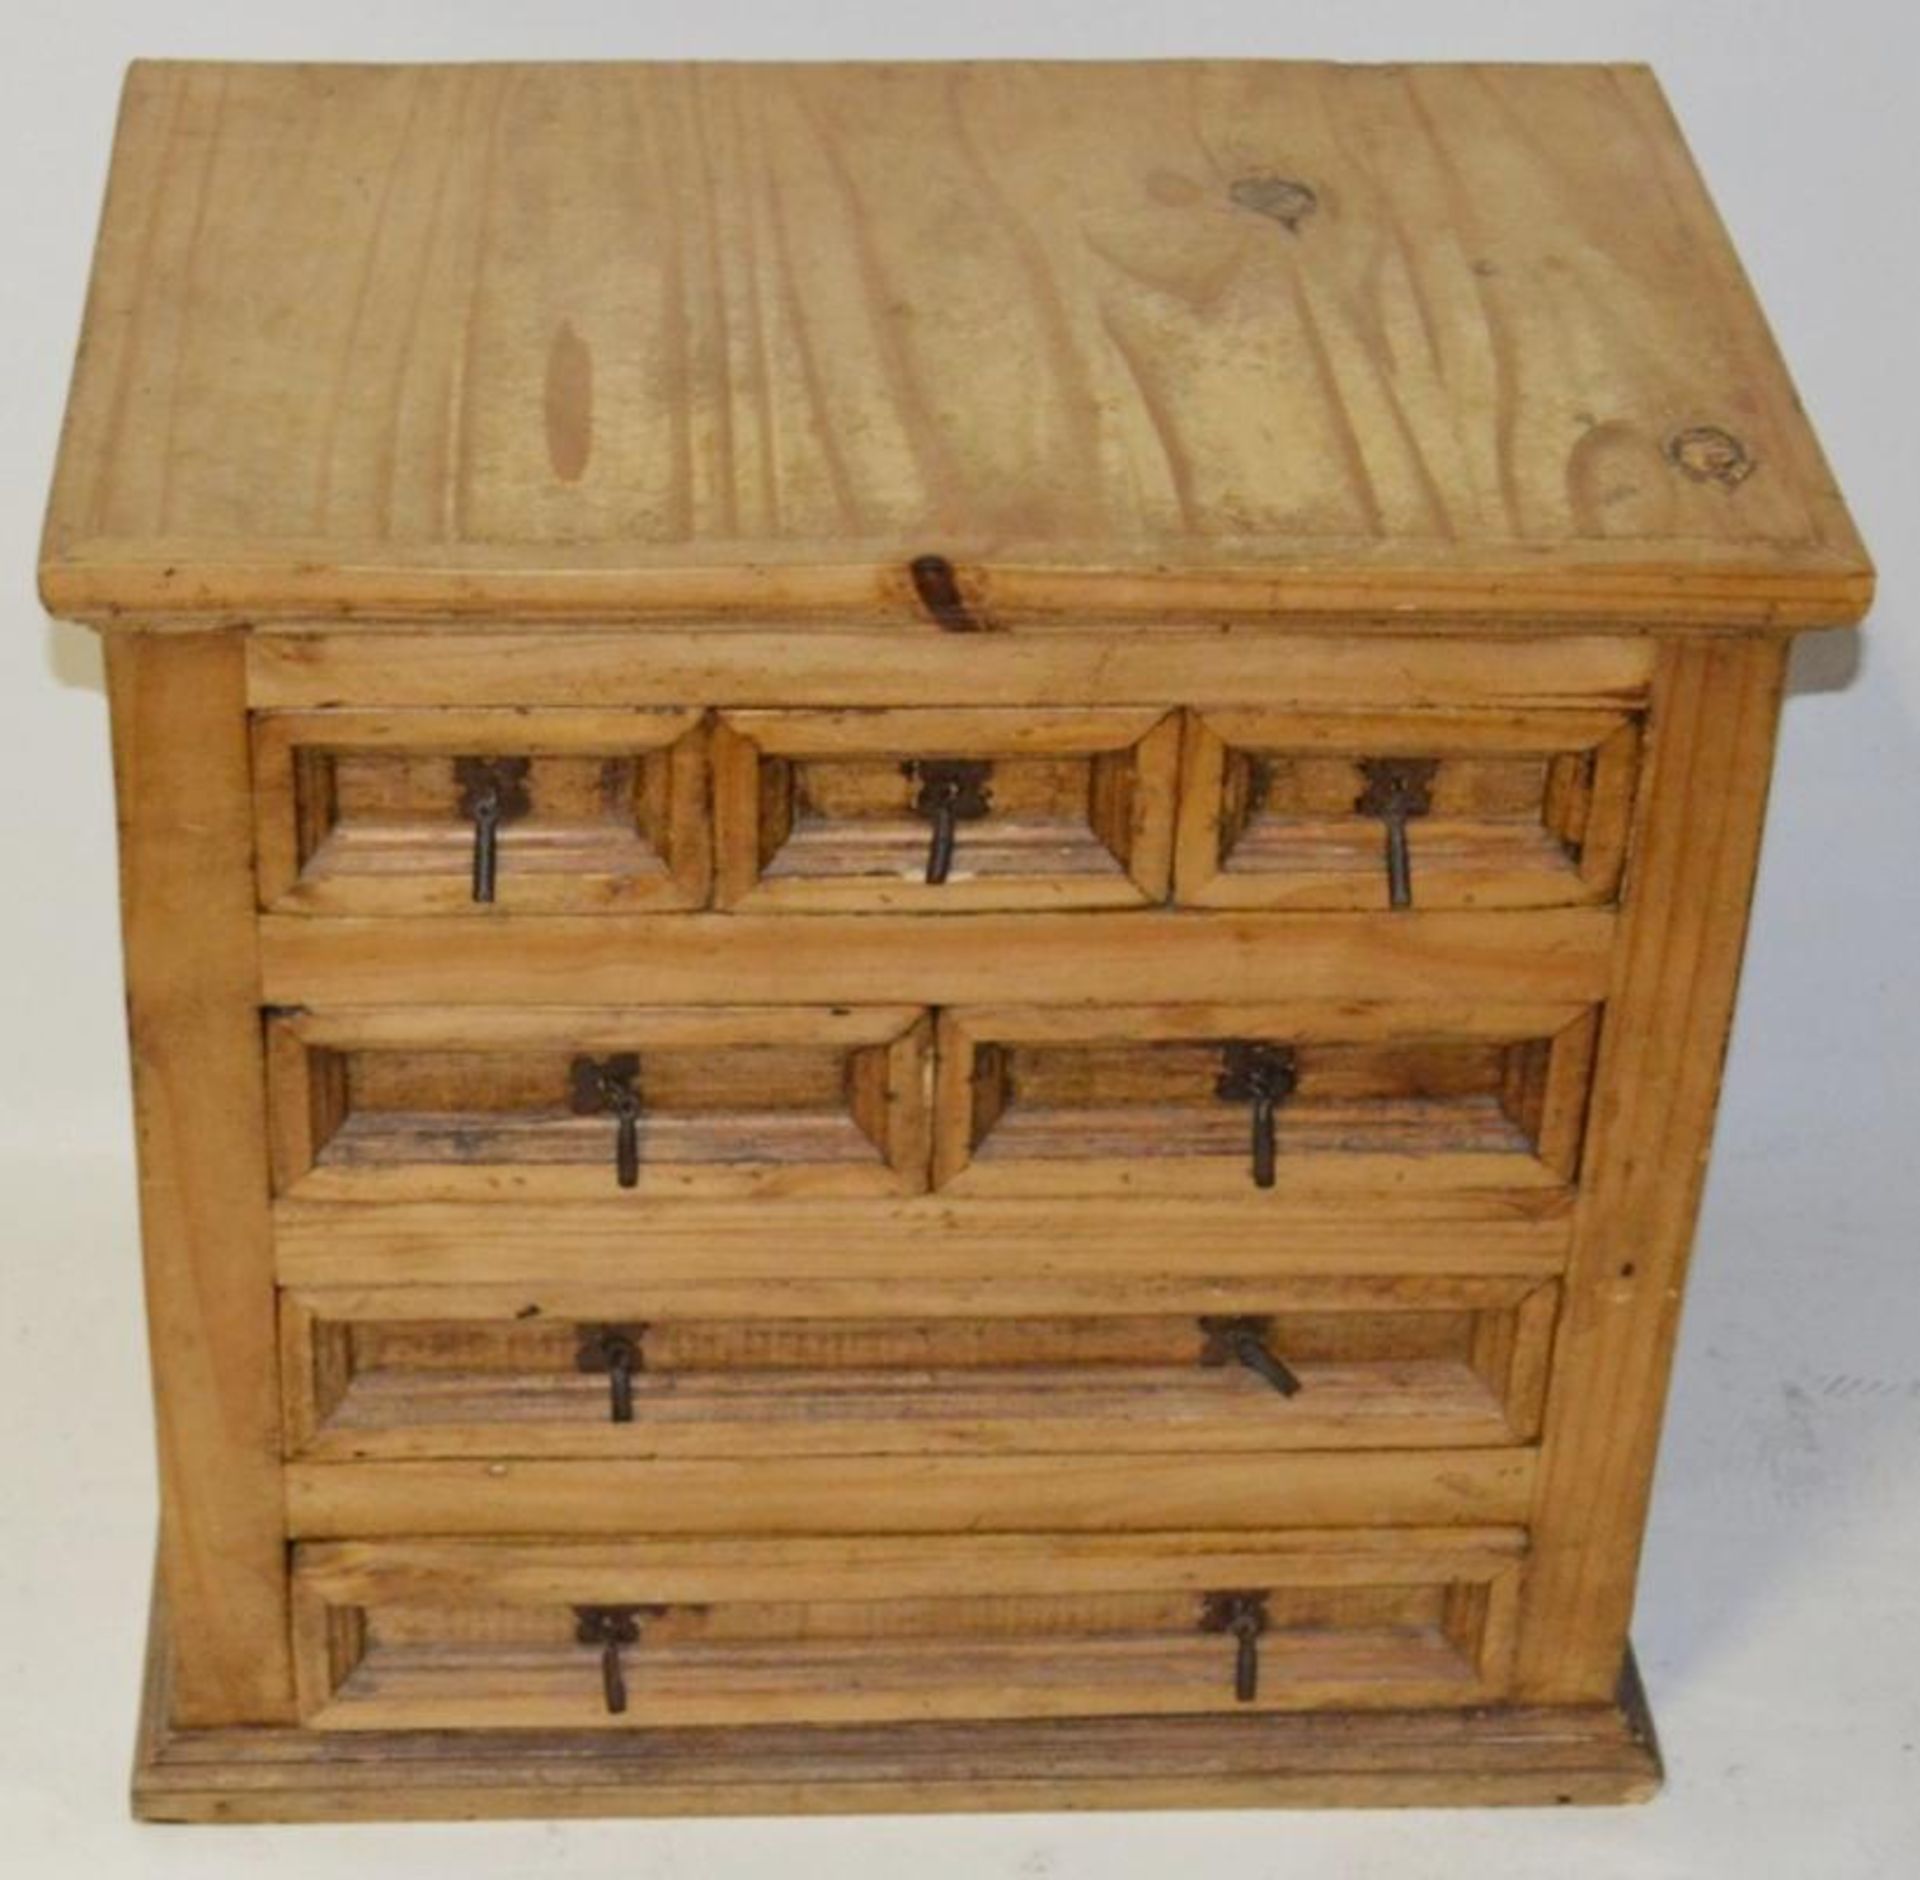 1 x Solid Wood Hand Crafted 7-Drawer Chest - Dimensions: W64 x D42 x H60cm - CL268 - Ref: MT946 - Ve